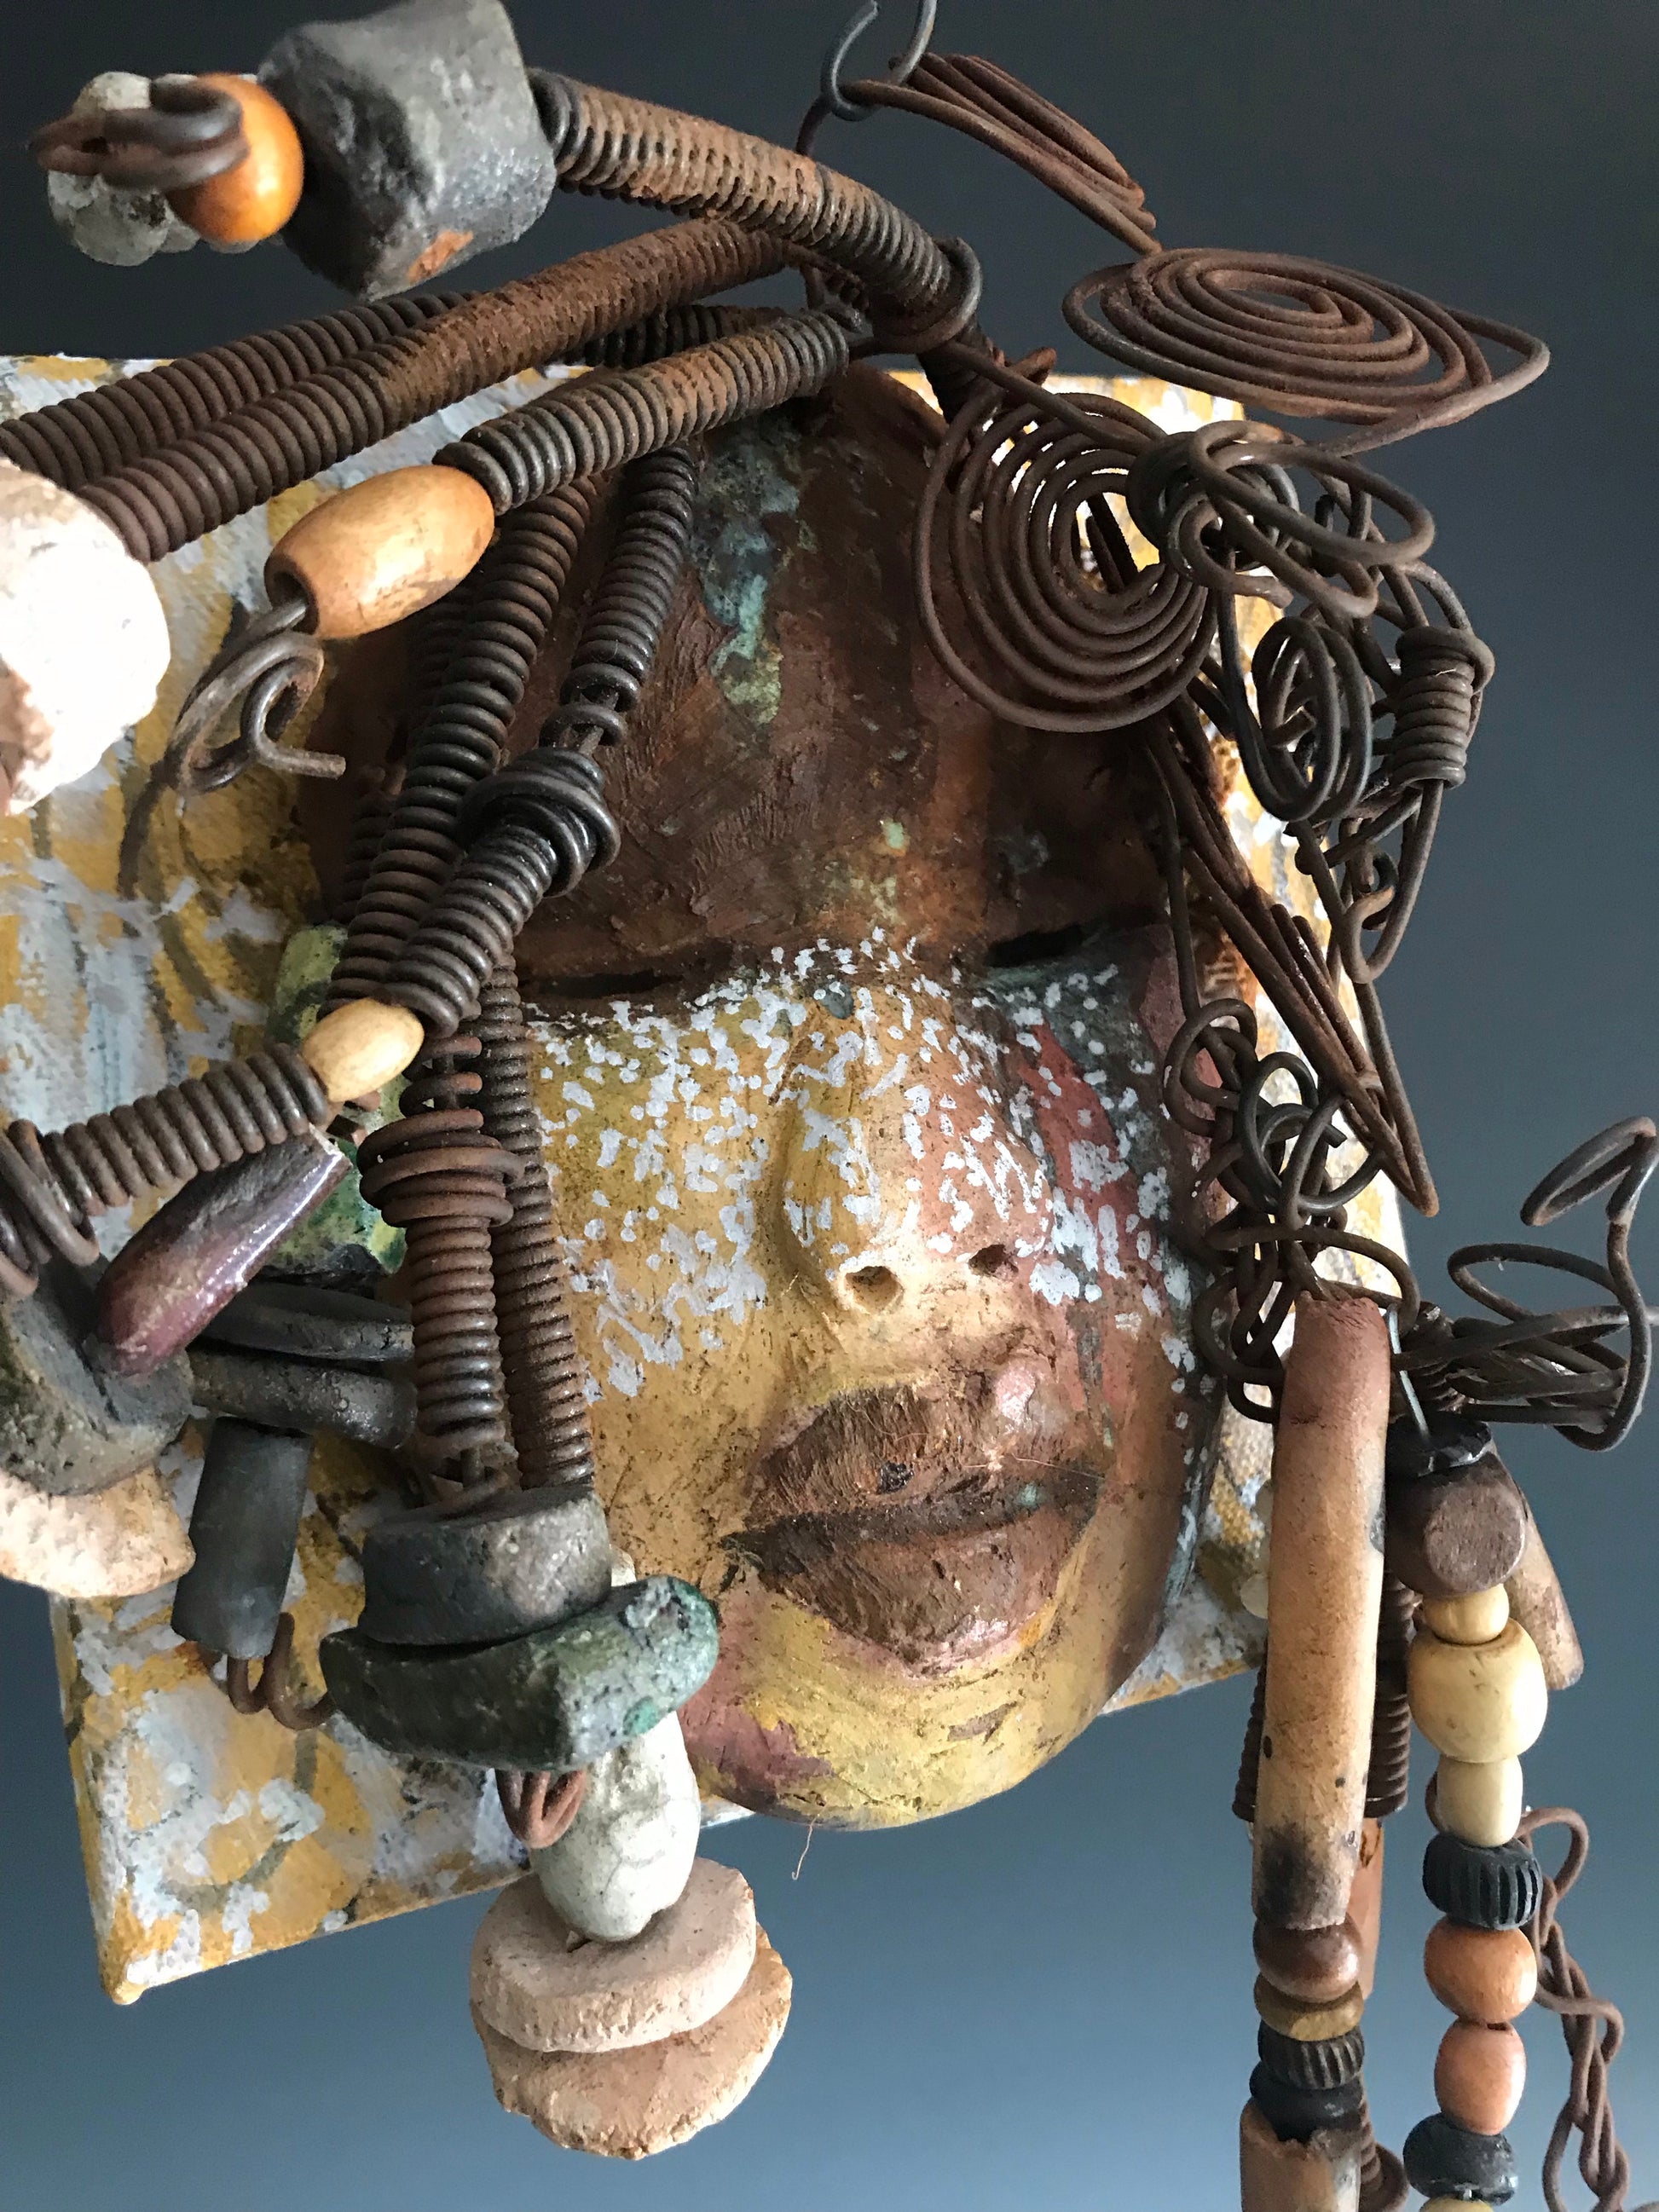      Iowa is uniquely mounted on a painted 6"x 4"x 2" canvas. It weighs 1.13 lbs.     Her face has white dots over an earthy.glaze with dark brown lips.     Iowa has  hand coiled wire, multi color raku beads,wood beads, and textured earthy cloth..  Iowa is ready to be hung!